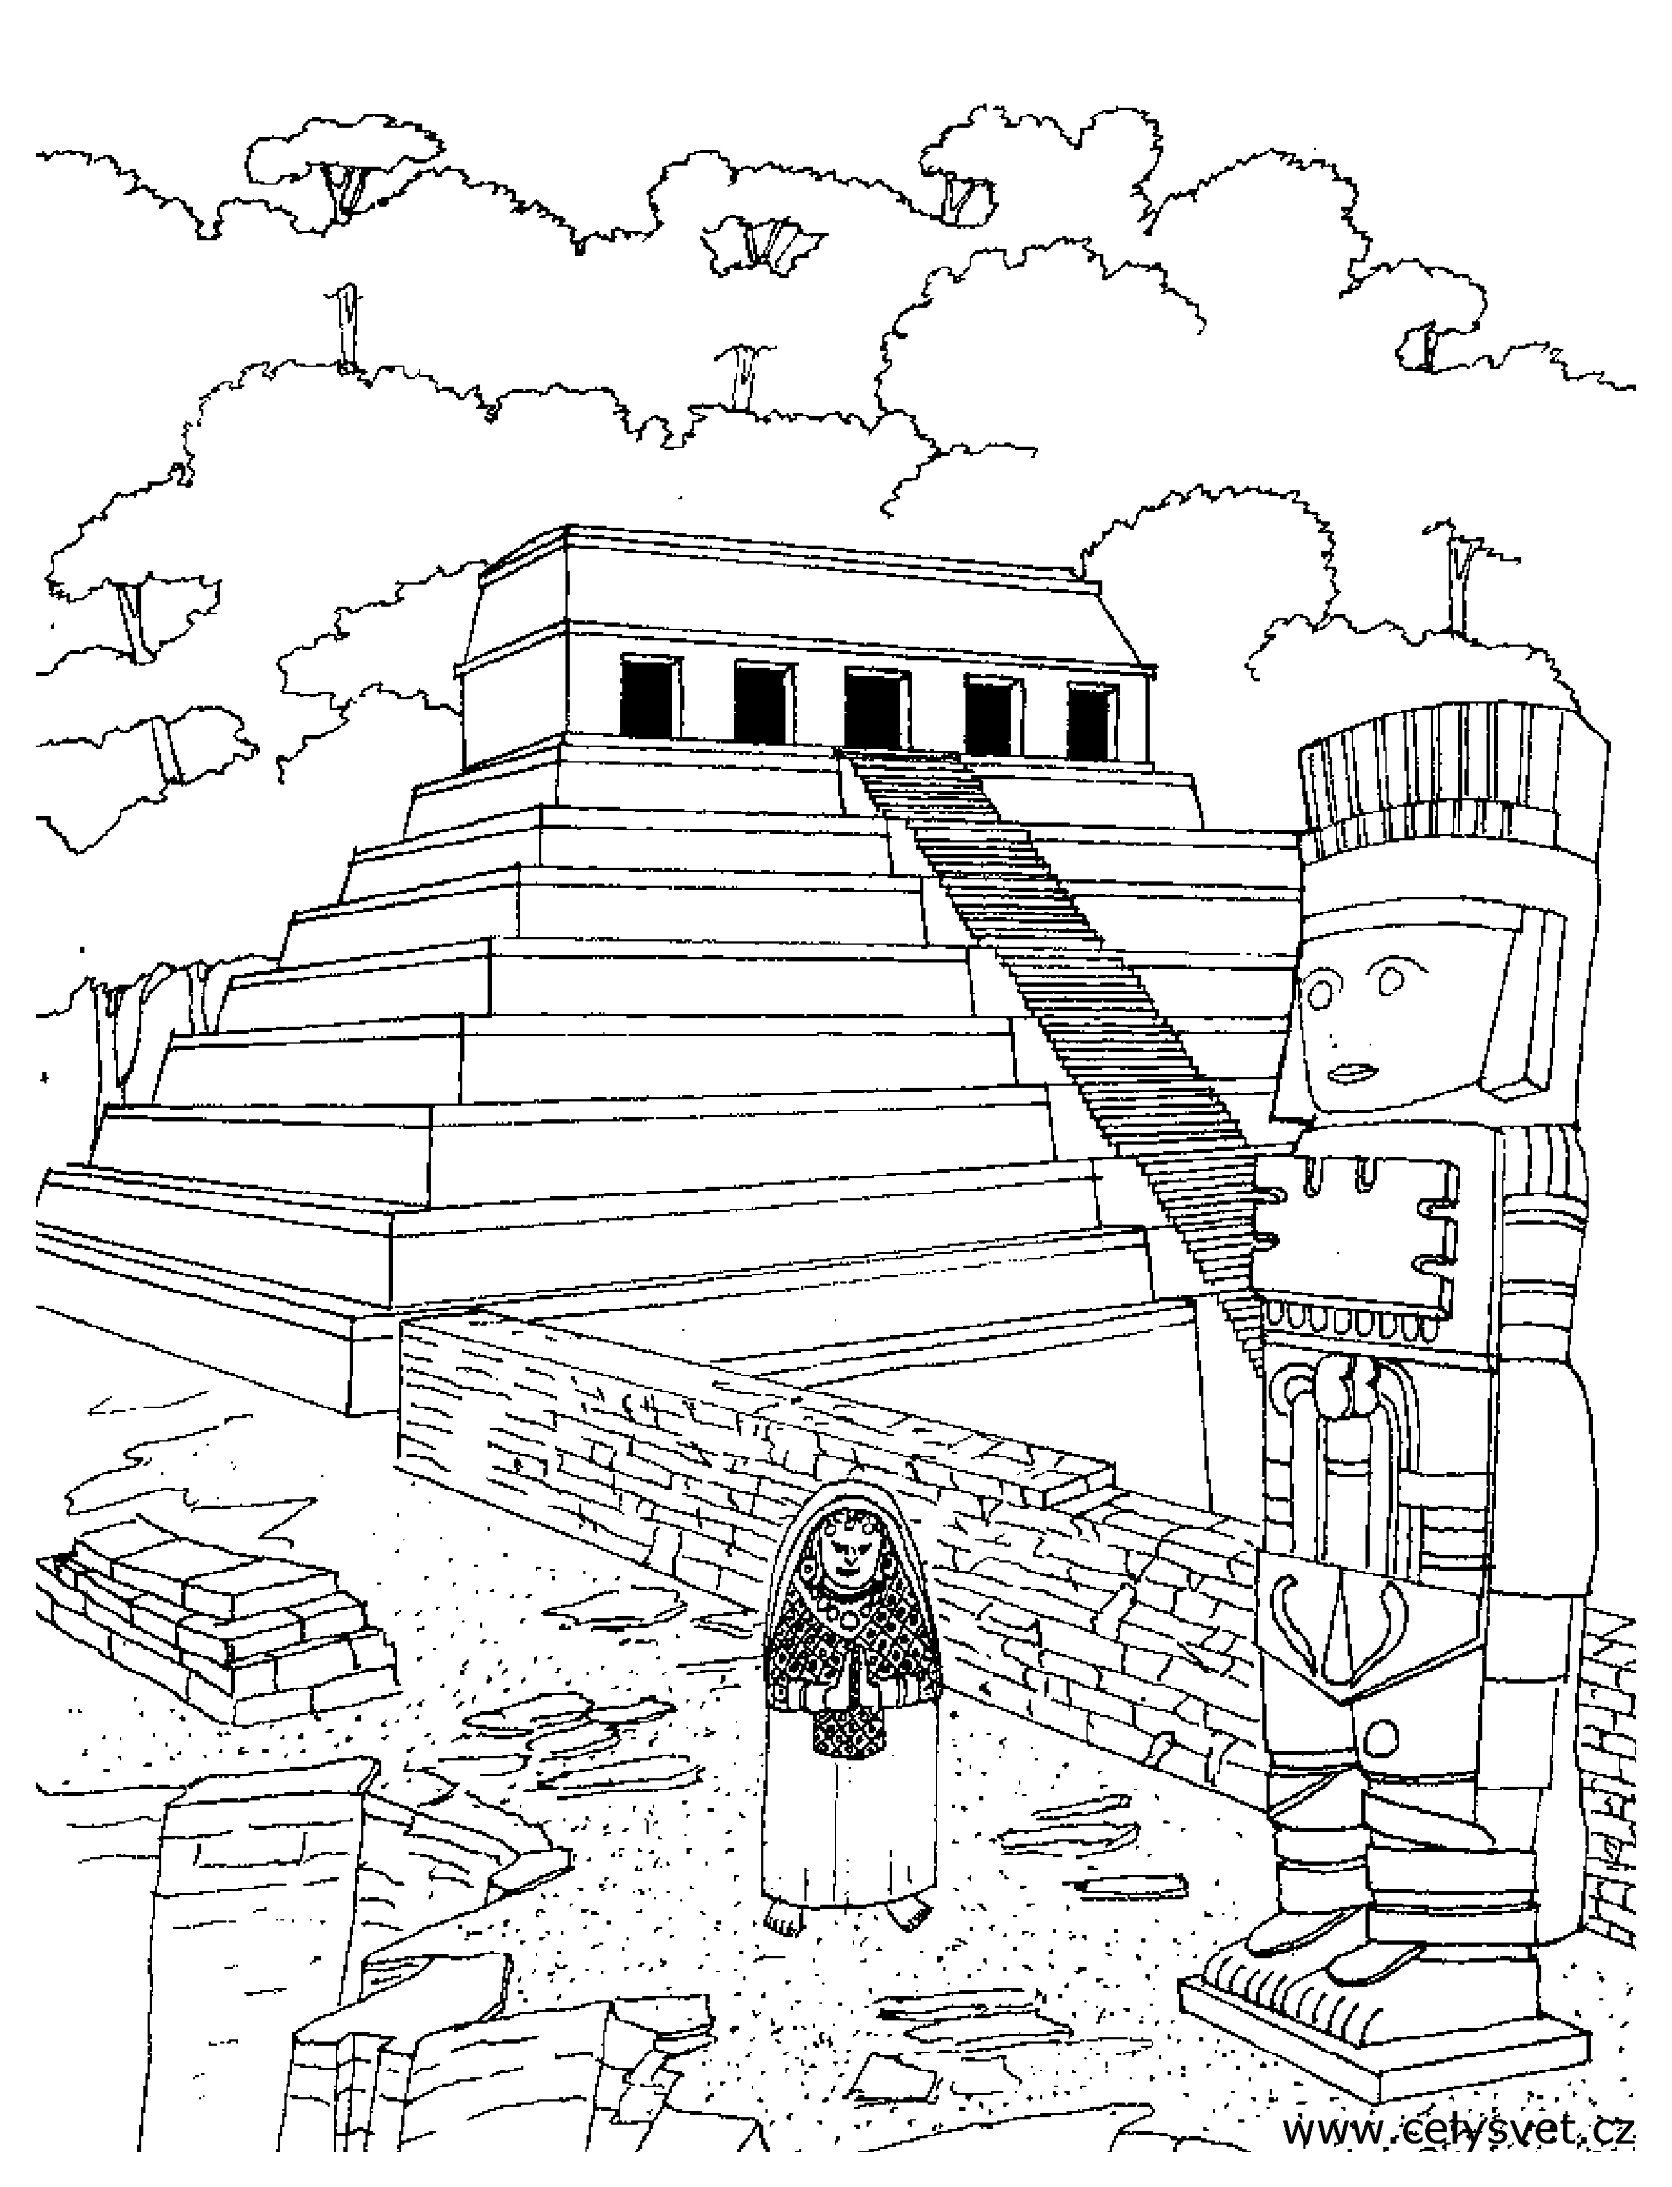 Mayans & Incas - Coloring pages for adults : coloring-adult-temple ...